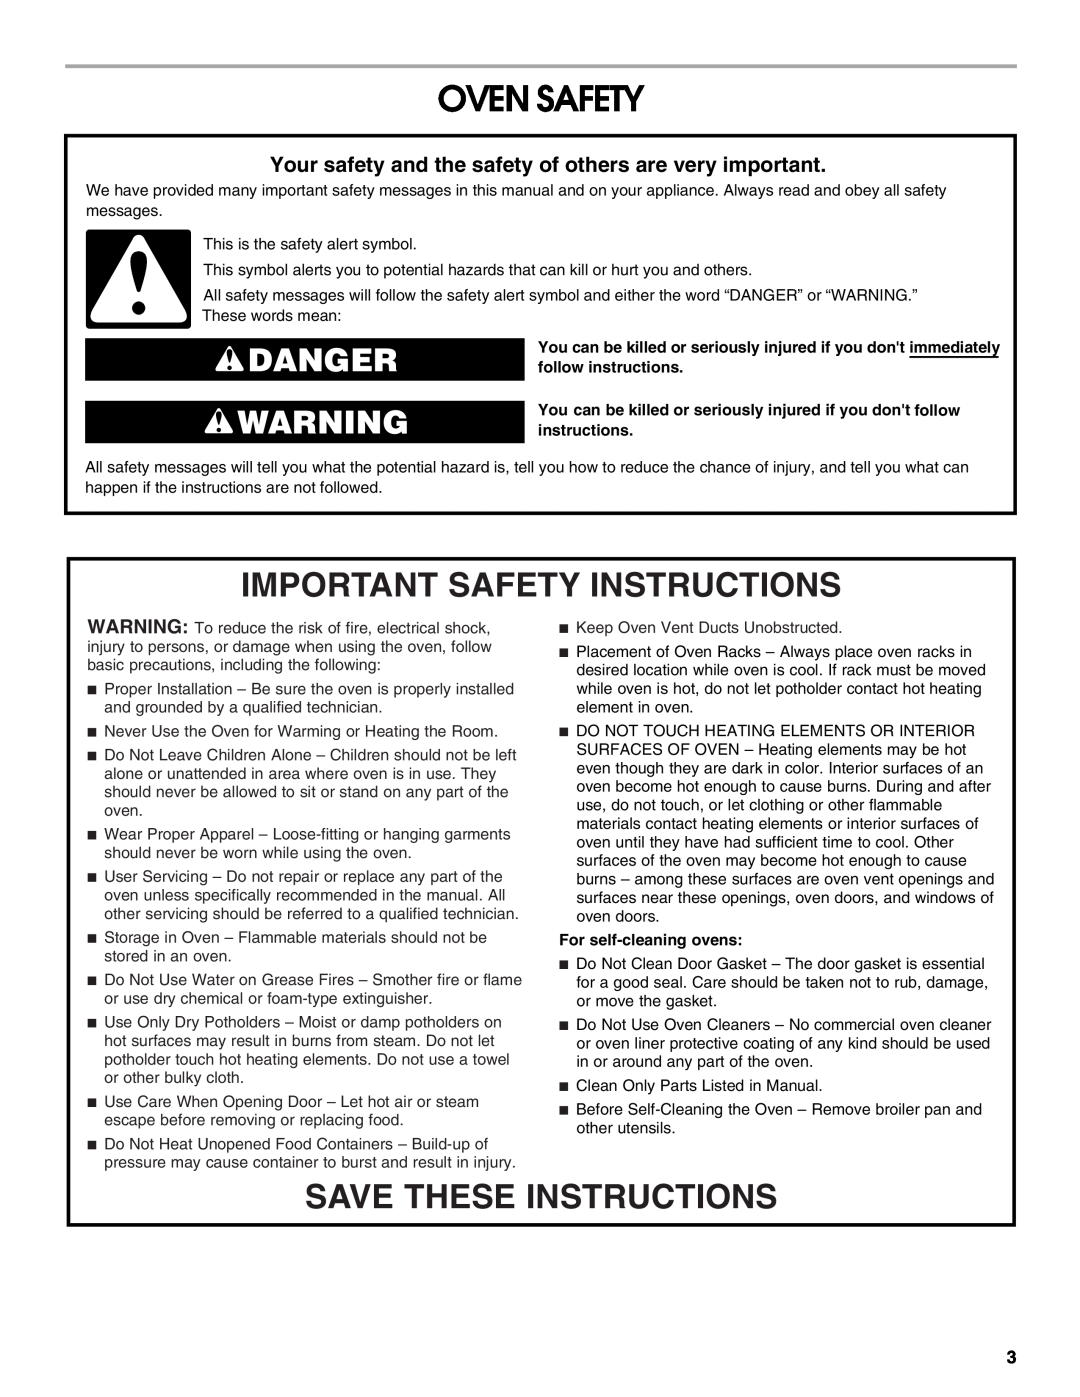 Whirlpool IBS550P Oven Safety, Important Safety Instructions, Save These Instructions, Danger, For self-cleaning ovens 